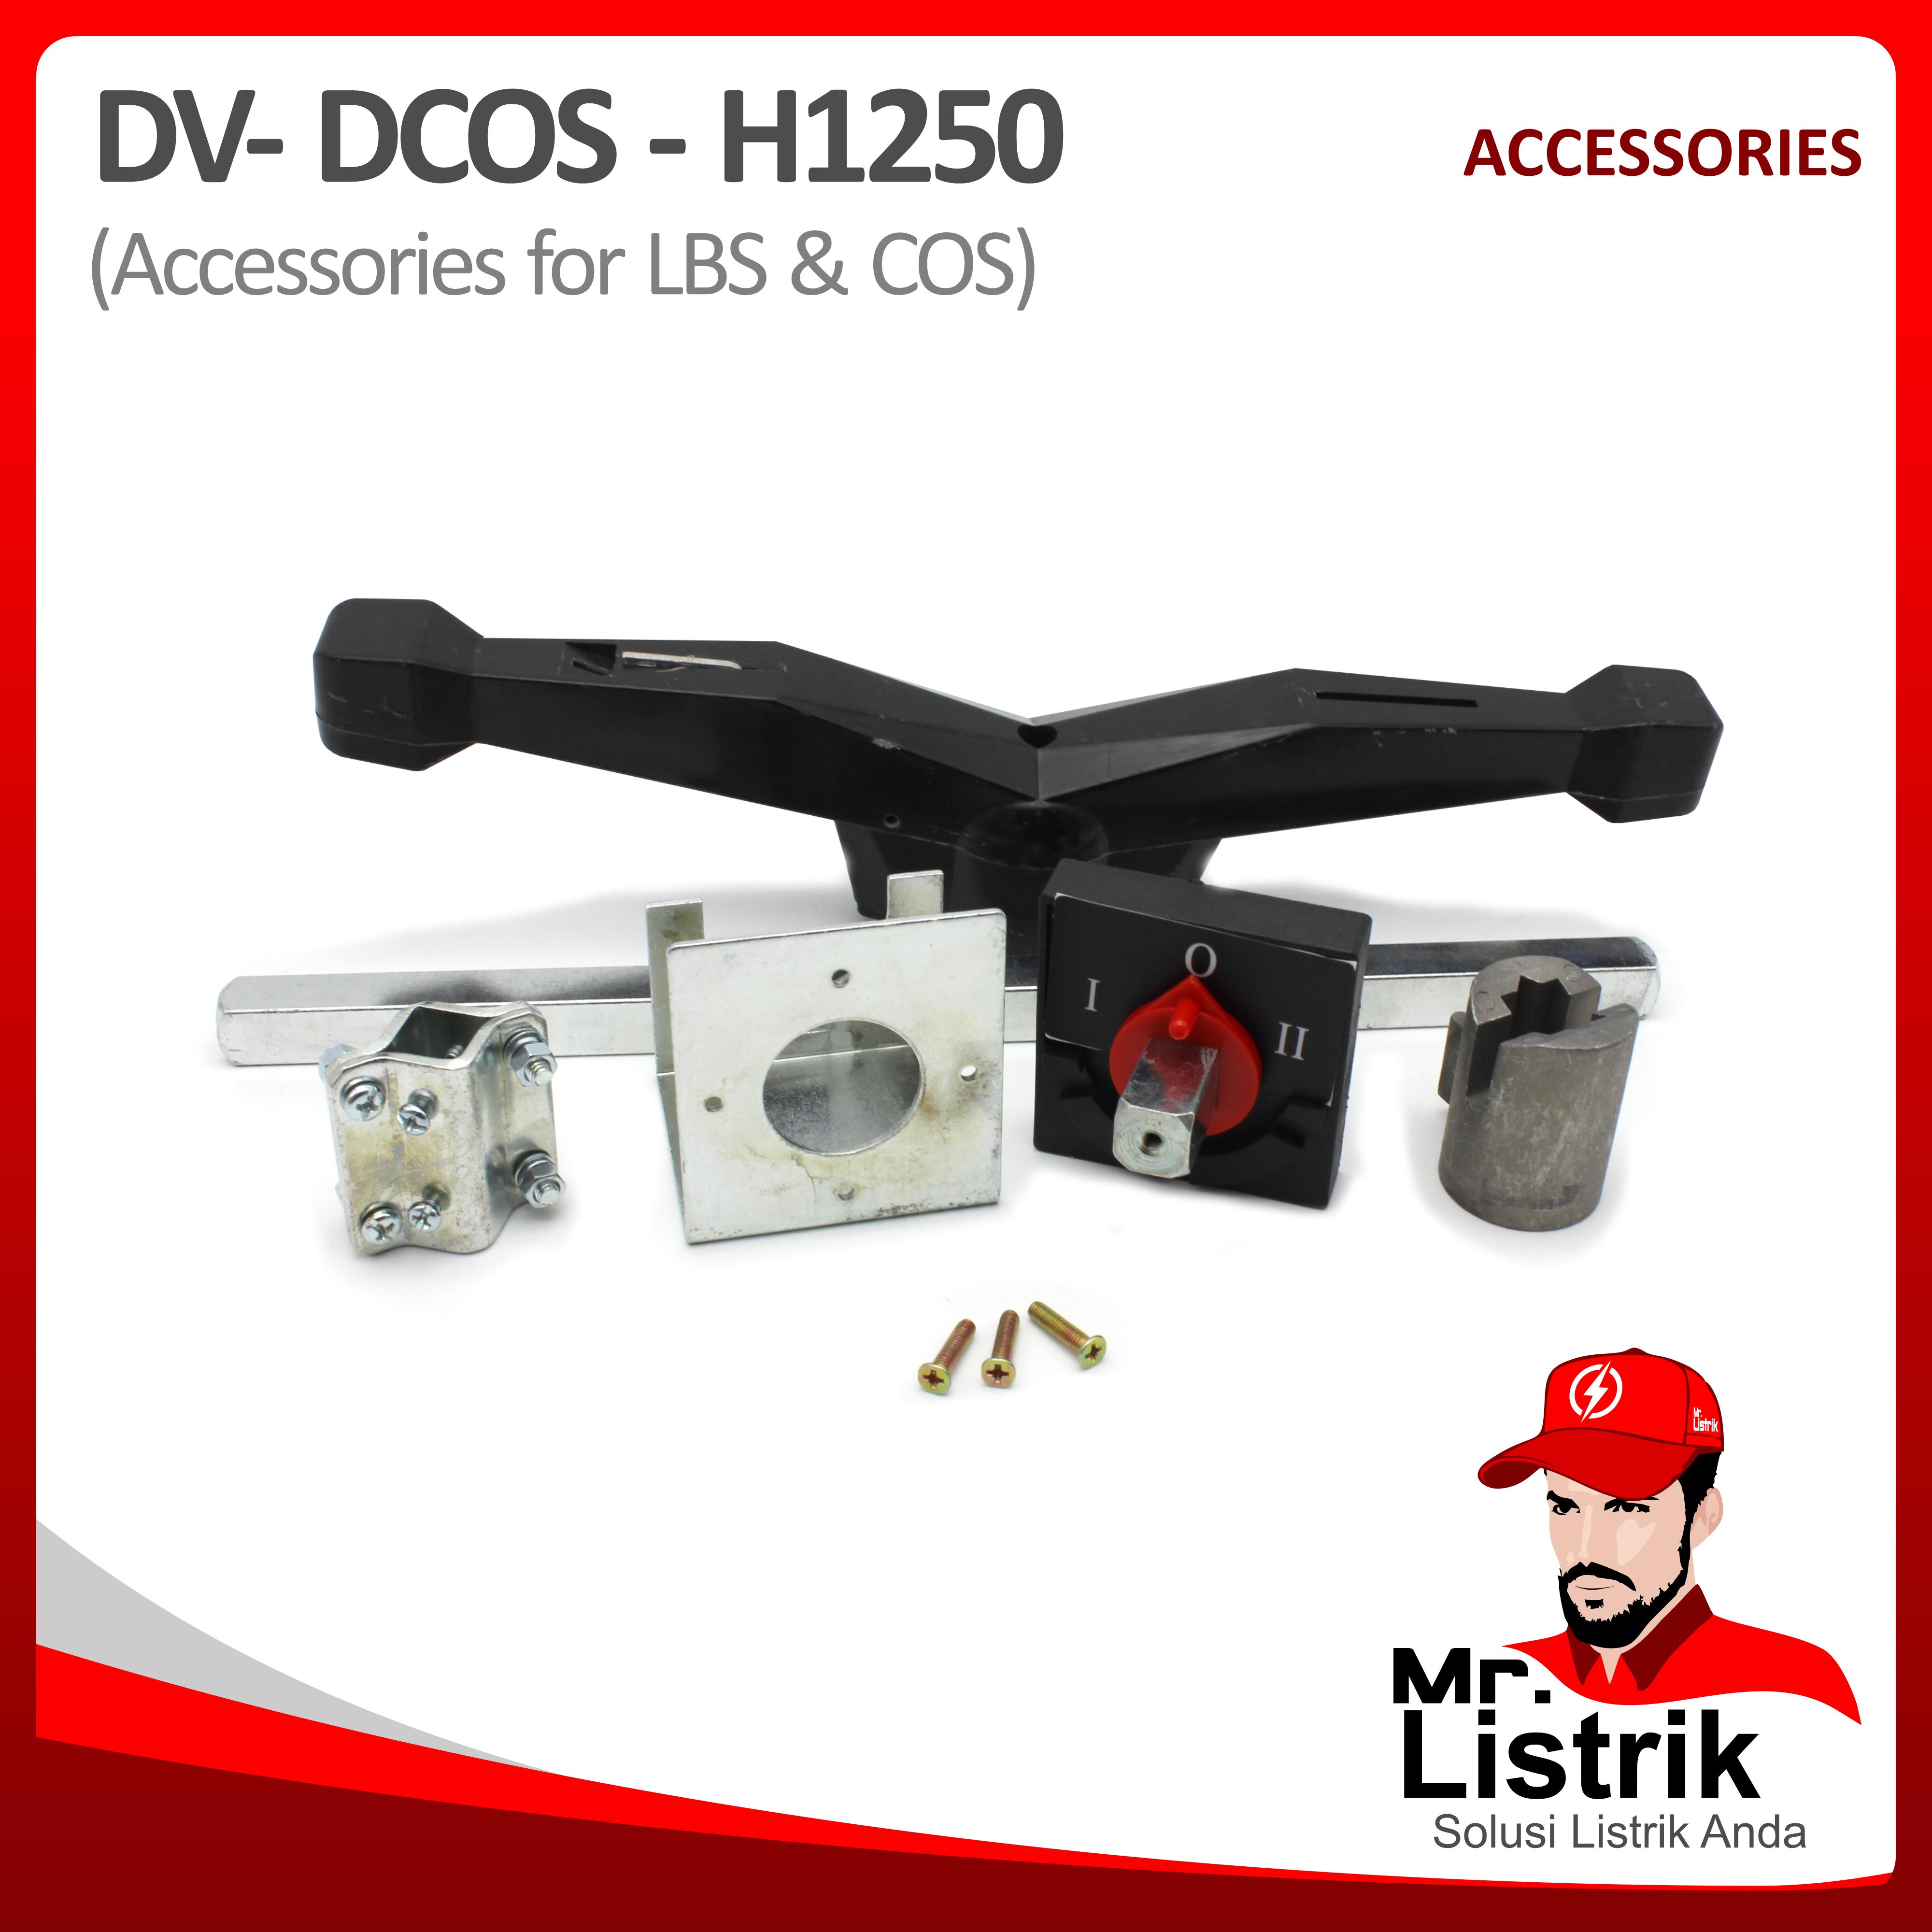 Extention Shaft + Handle Out Door for COS DV DCOS-H1250